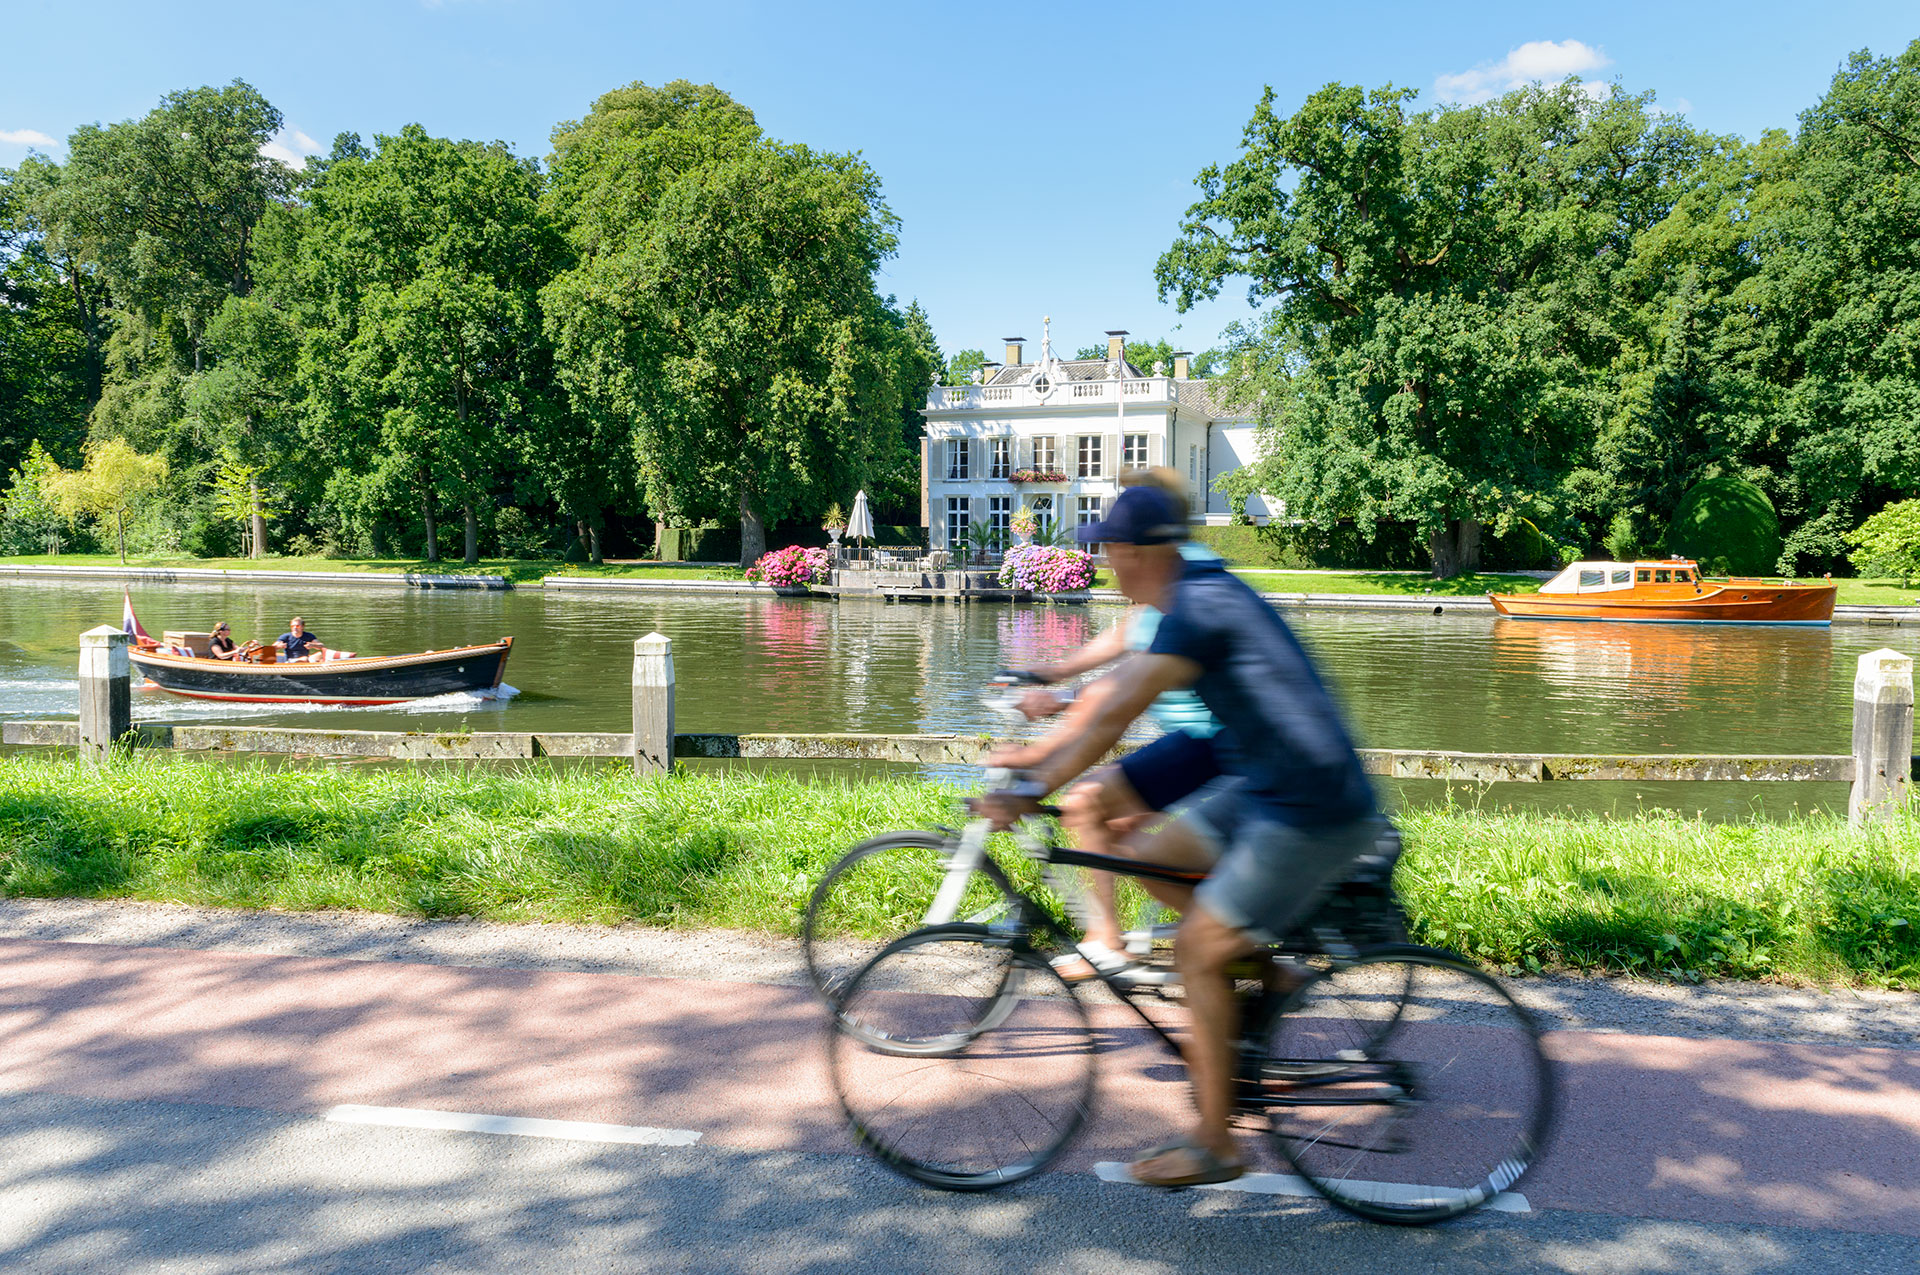 River Vecht with bicycles, motor boat and country estate